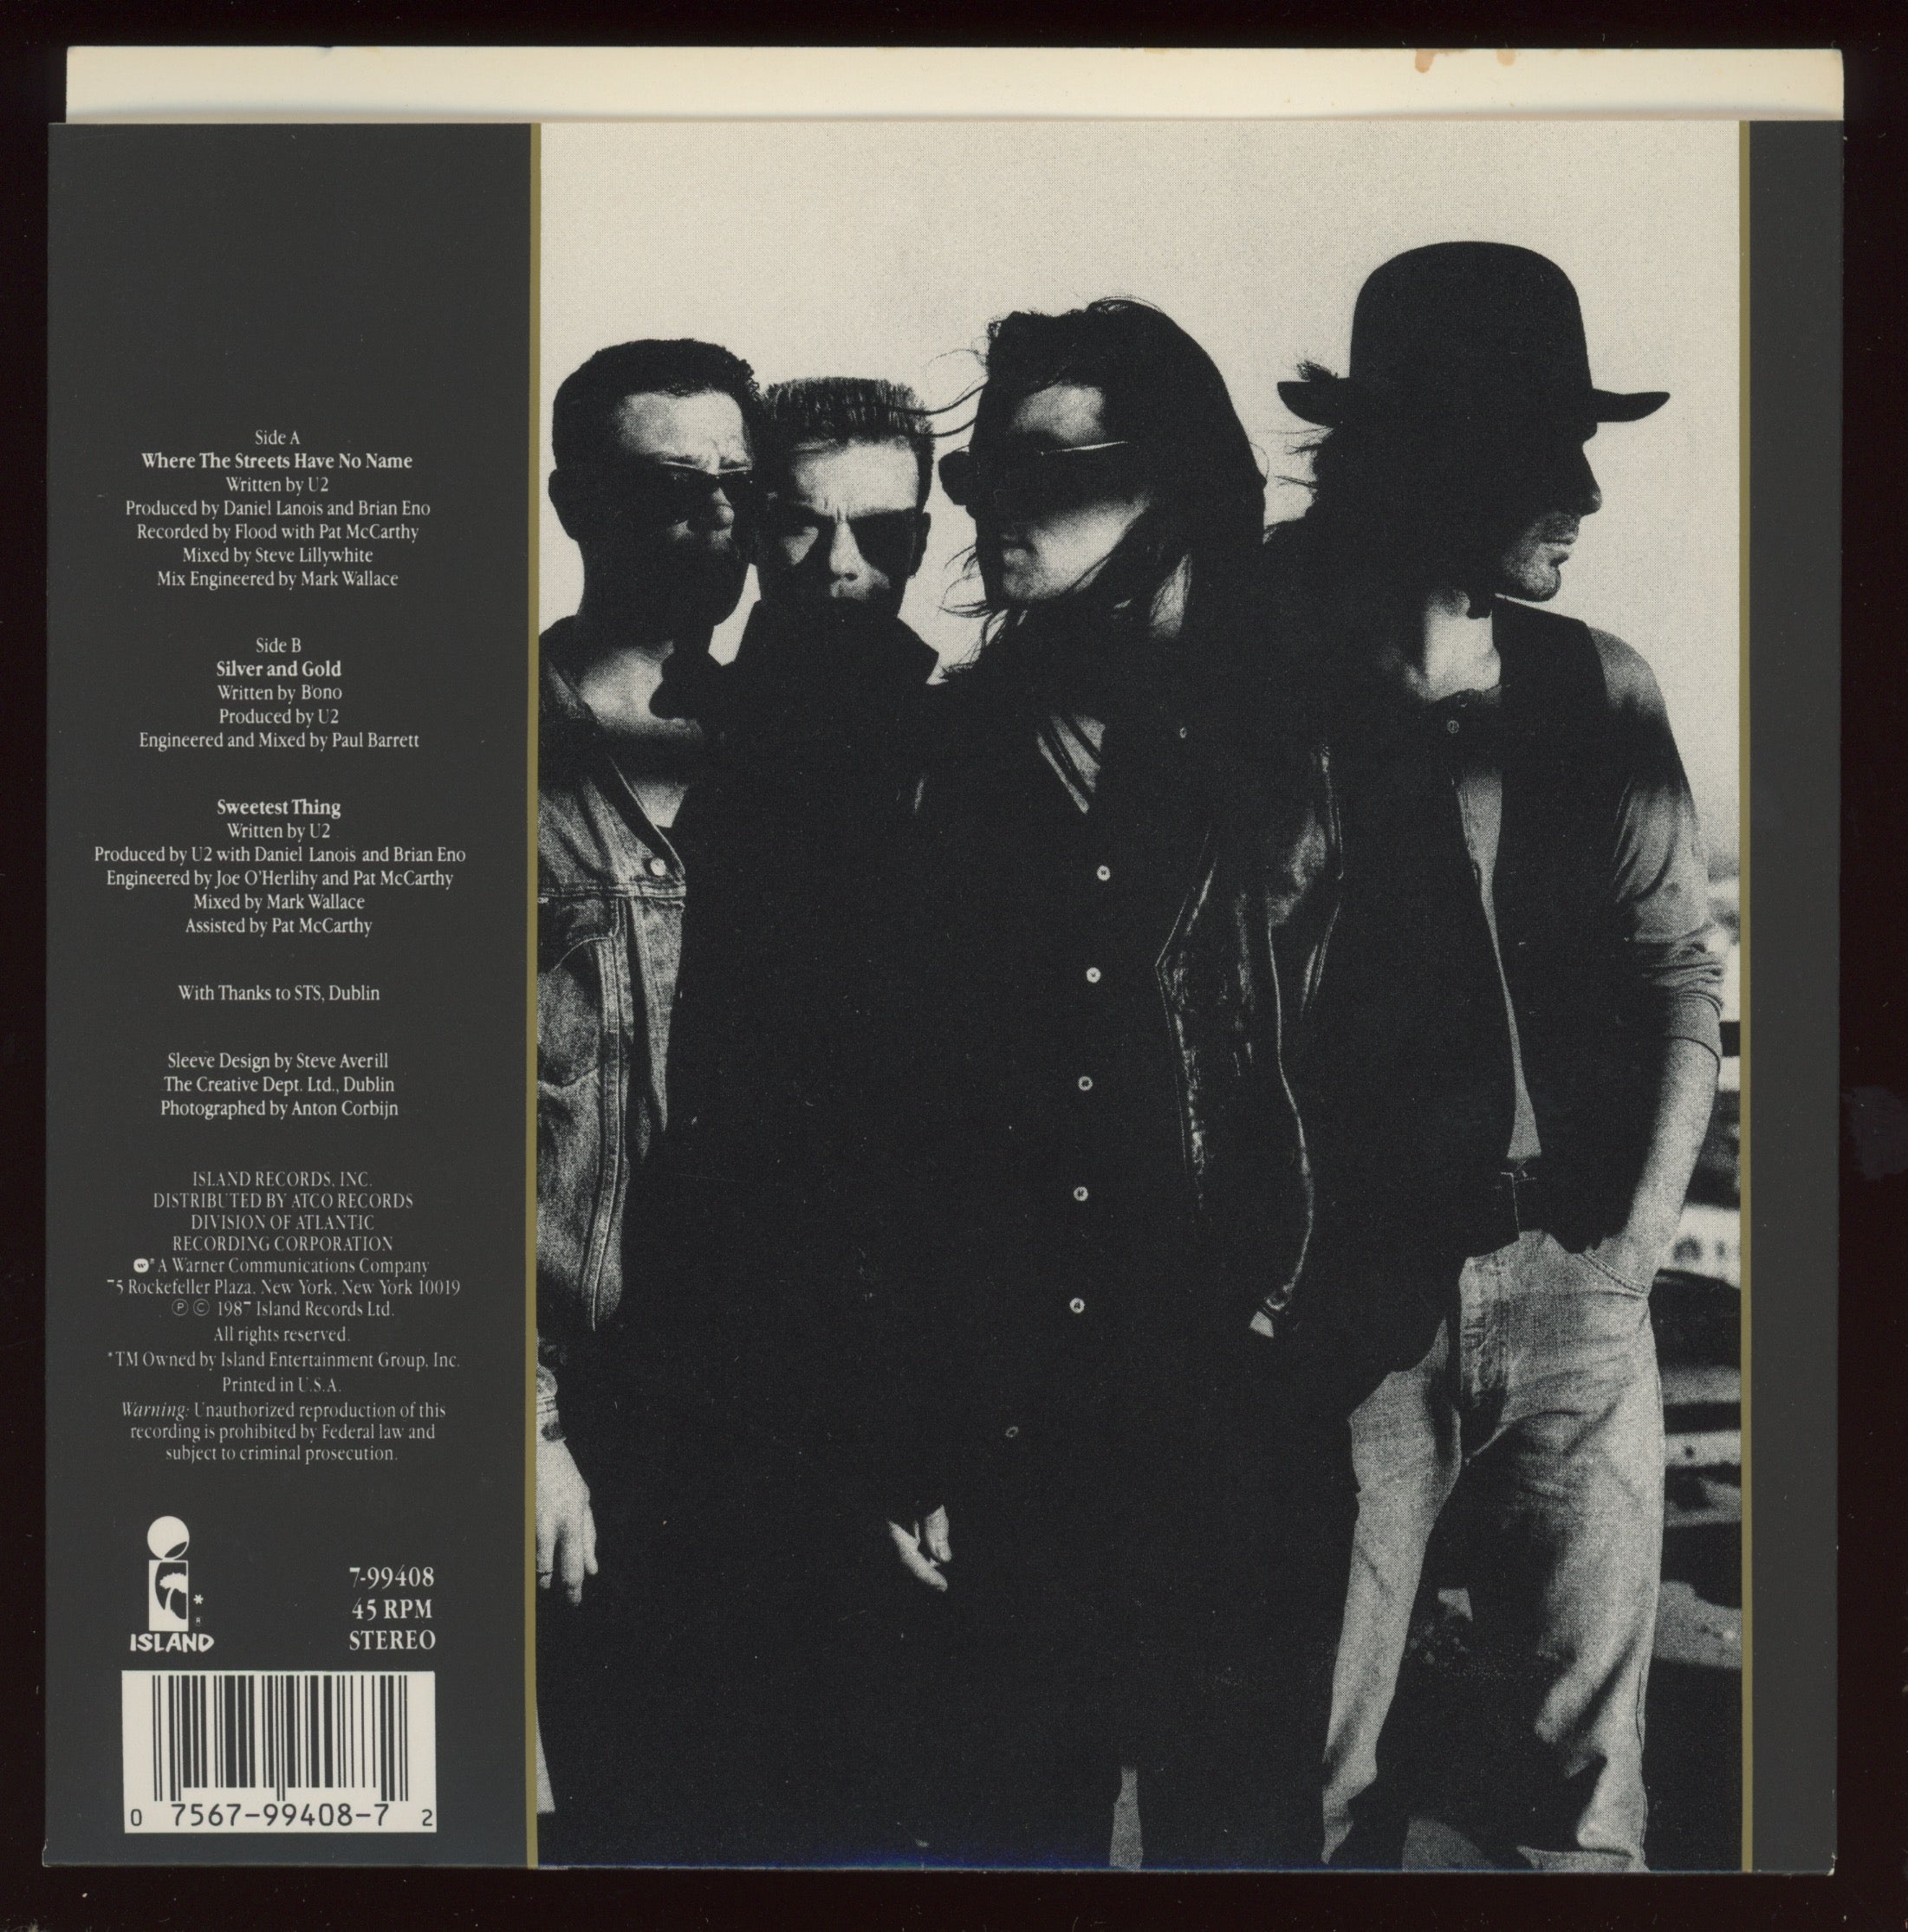 U2 - Where The Streets Have No Name on Island With Picture Sleeve